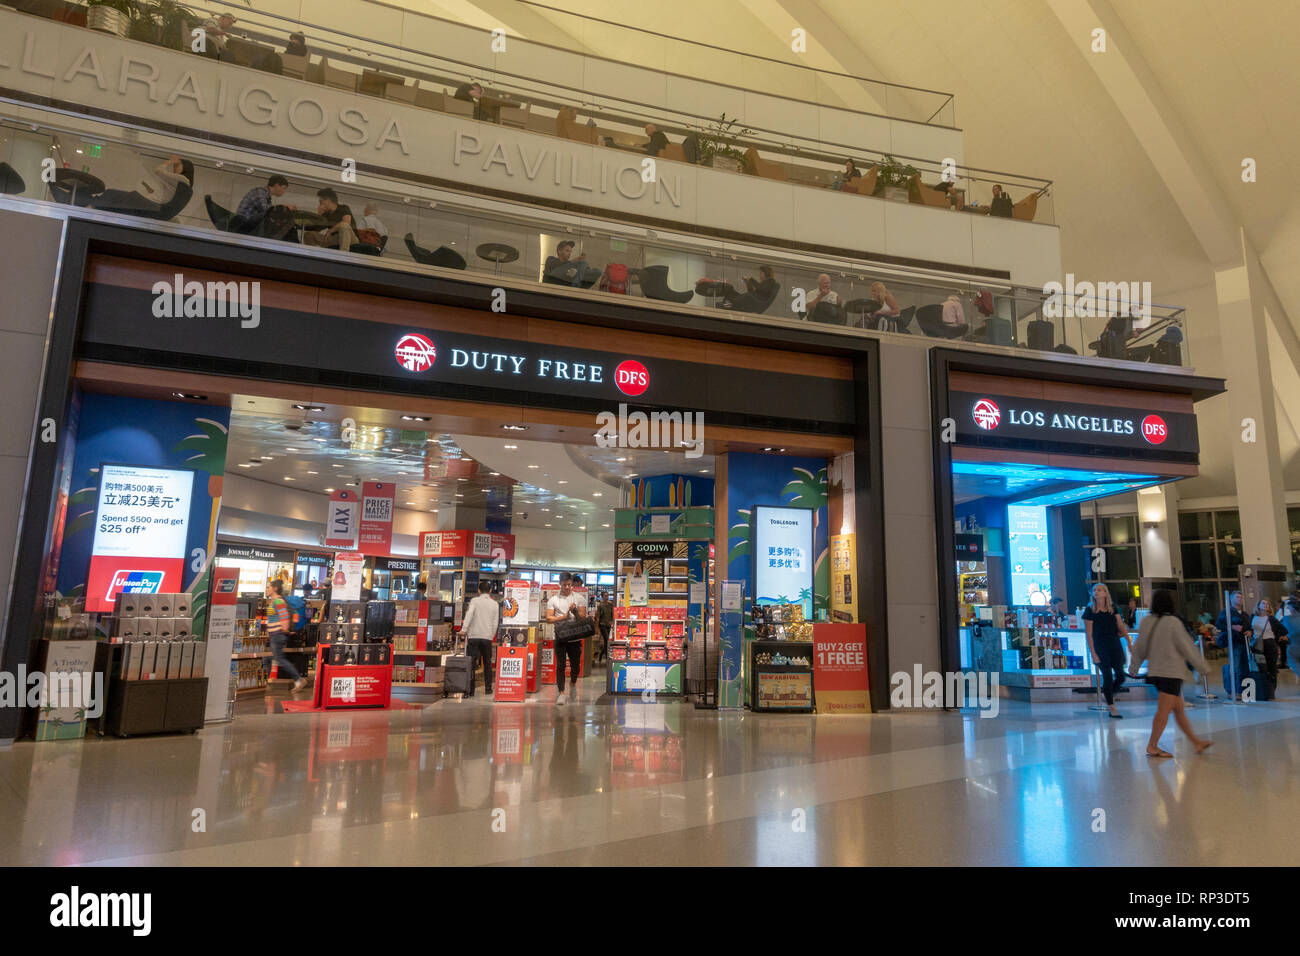 The DFS Duty Free store in Los Angeles International Airport (LAX